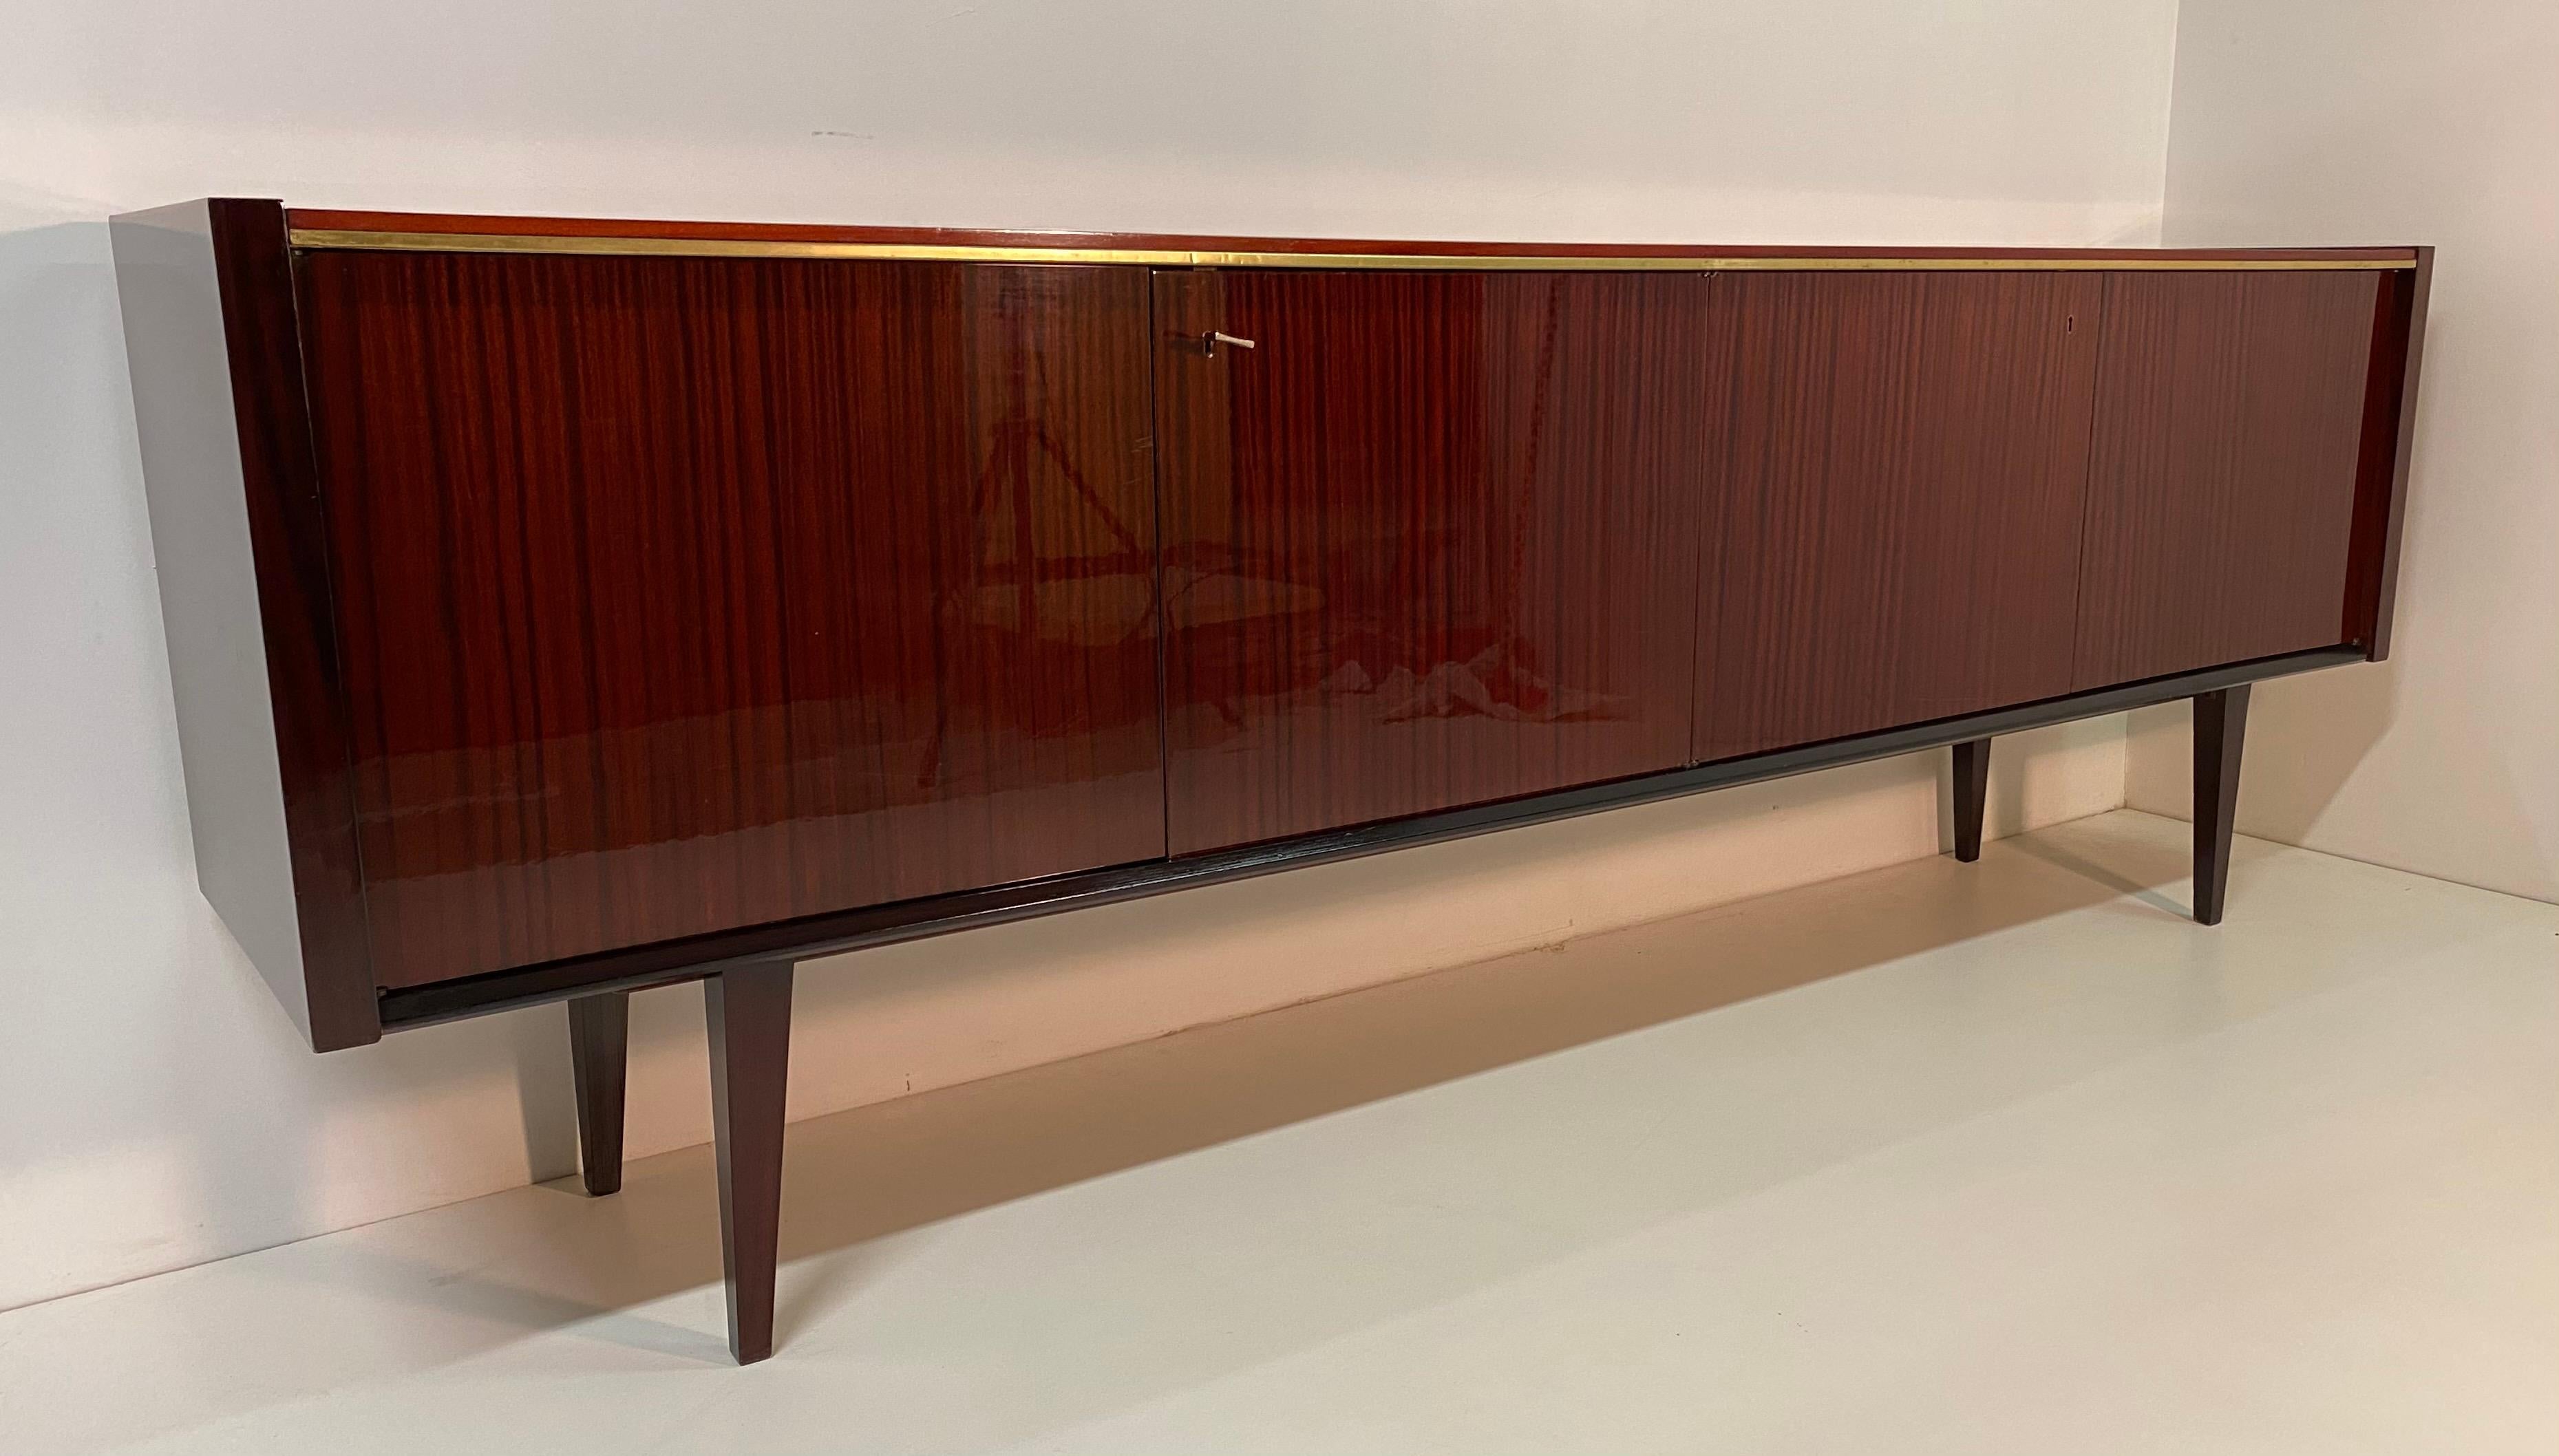 Italian sideboard of the 1960s veneered in mahogany with brass profile.
The sideboard is in excellent condition with some slight signs of aging.